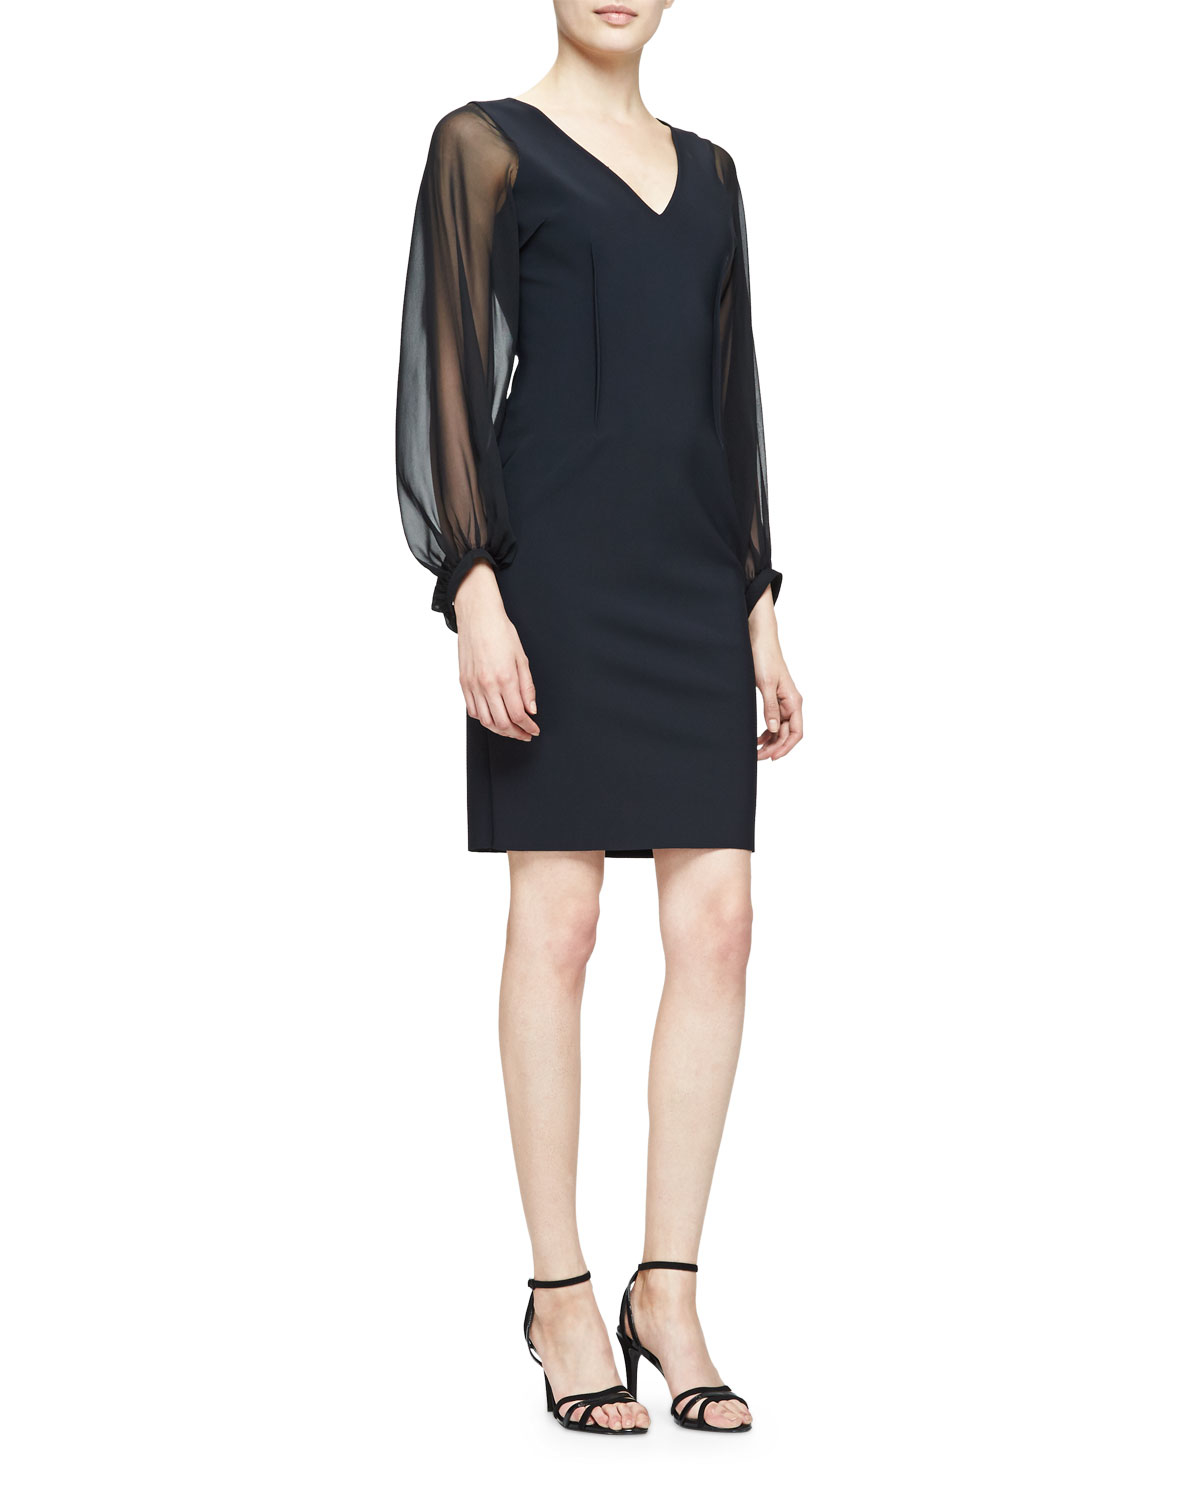 Sheath cocktail dress with sleeves top black